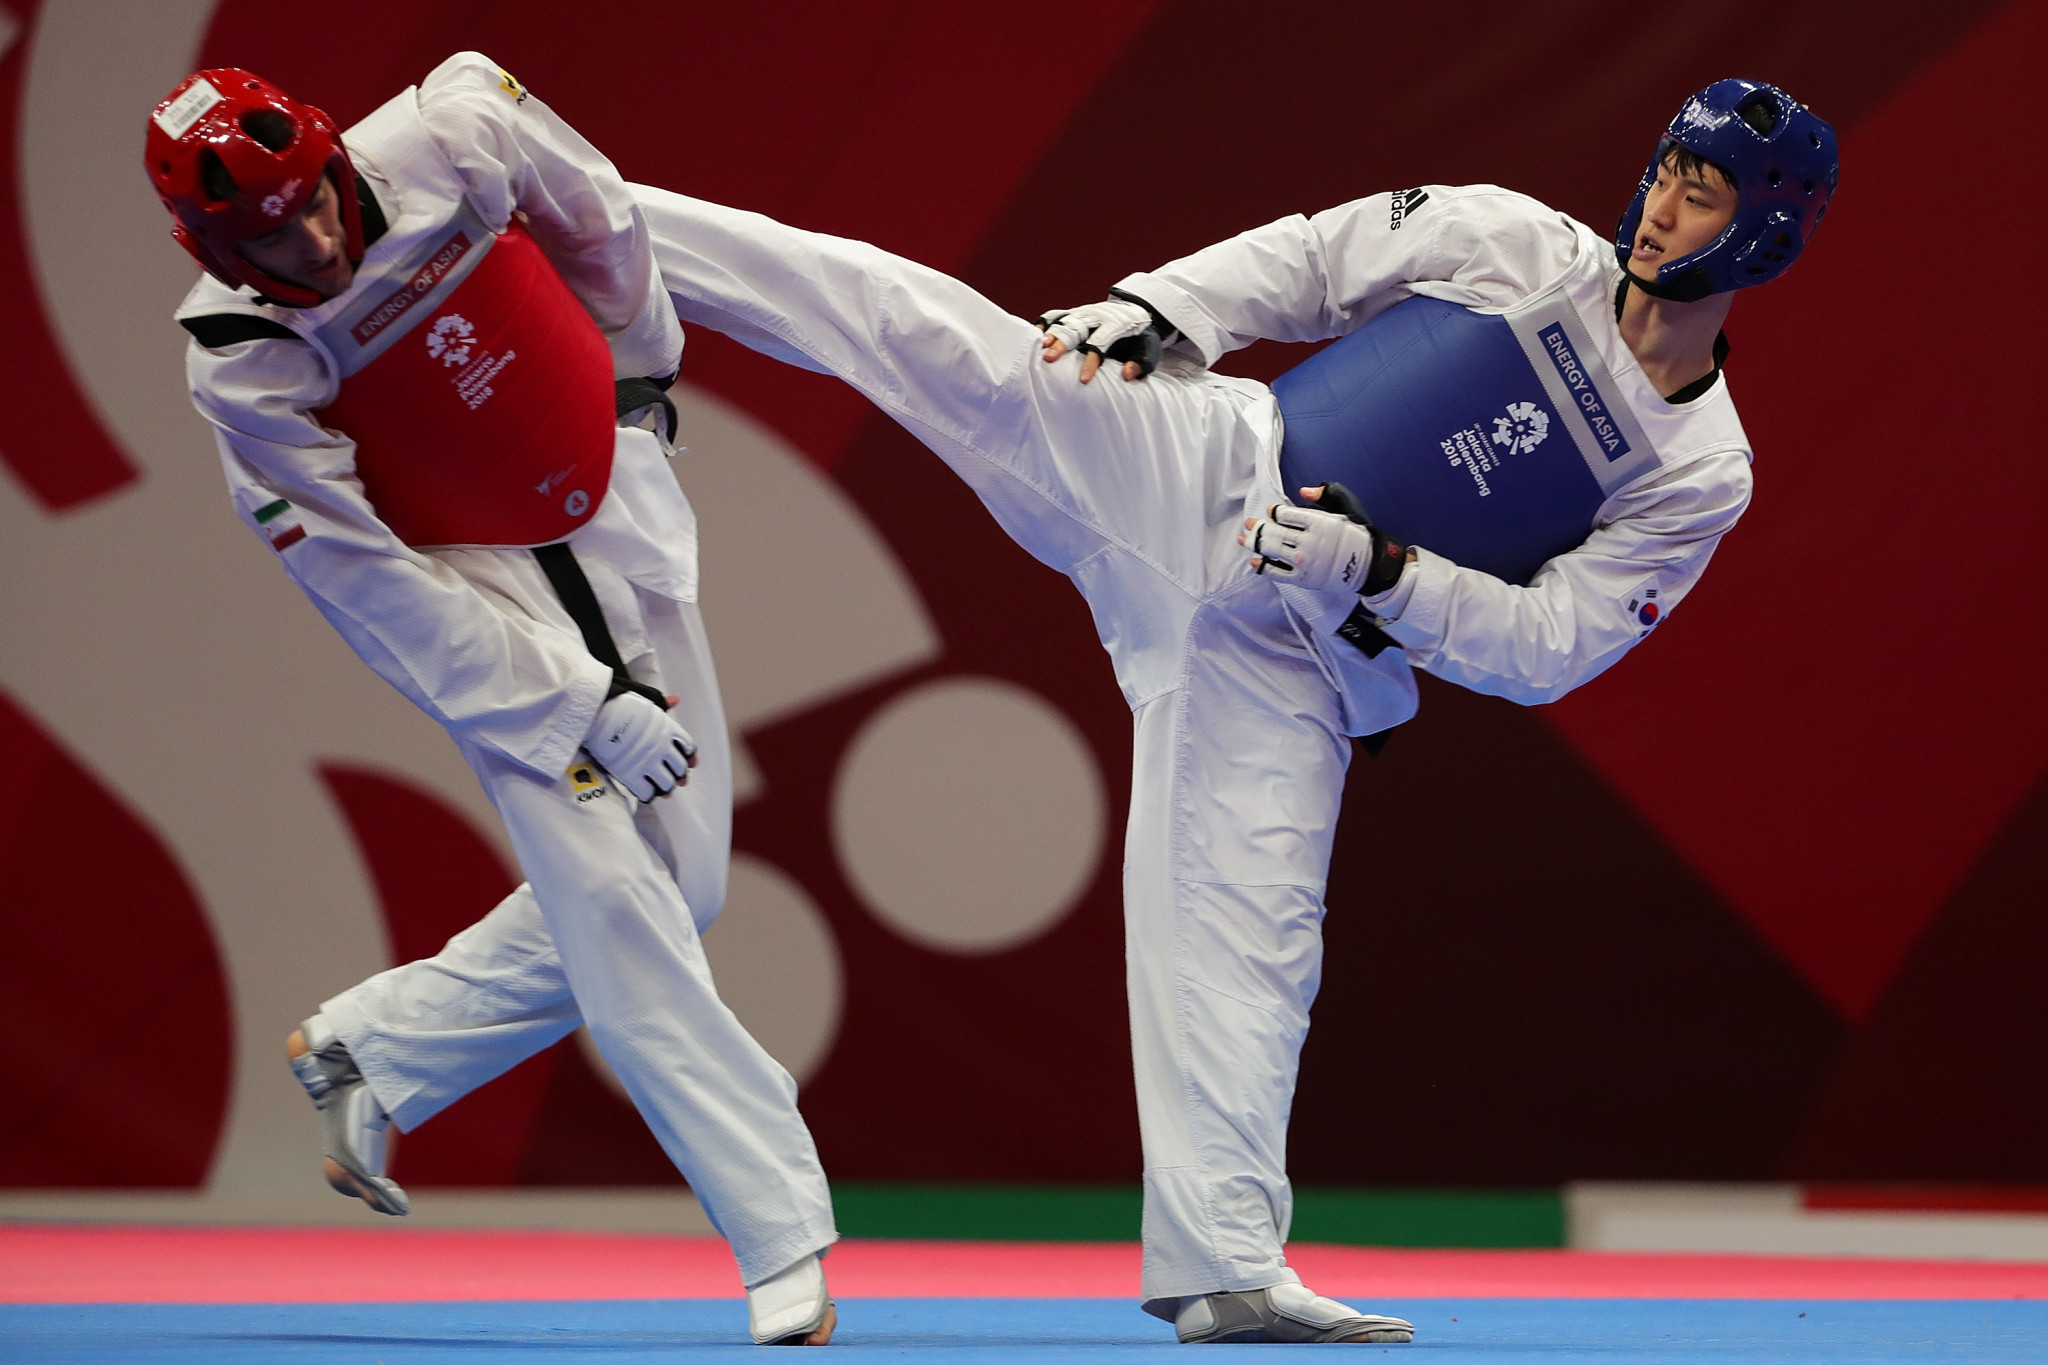 South Korea's Lee Dae-hoon made his mark today at the World Taekwondo Grand Slam Champions Series in Wuxi ©Getty Images